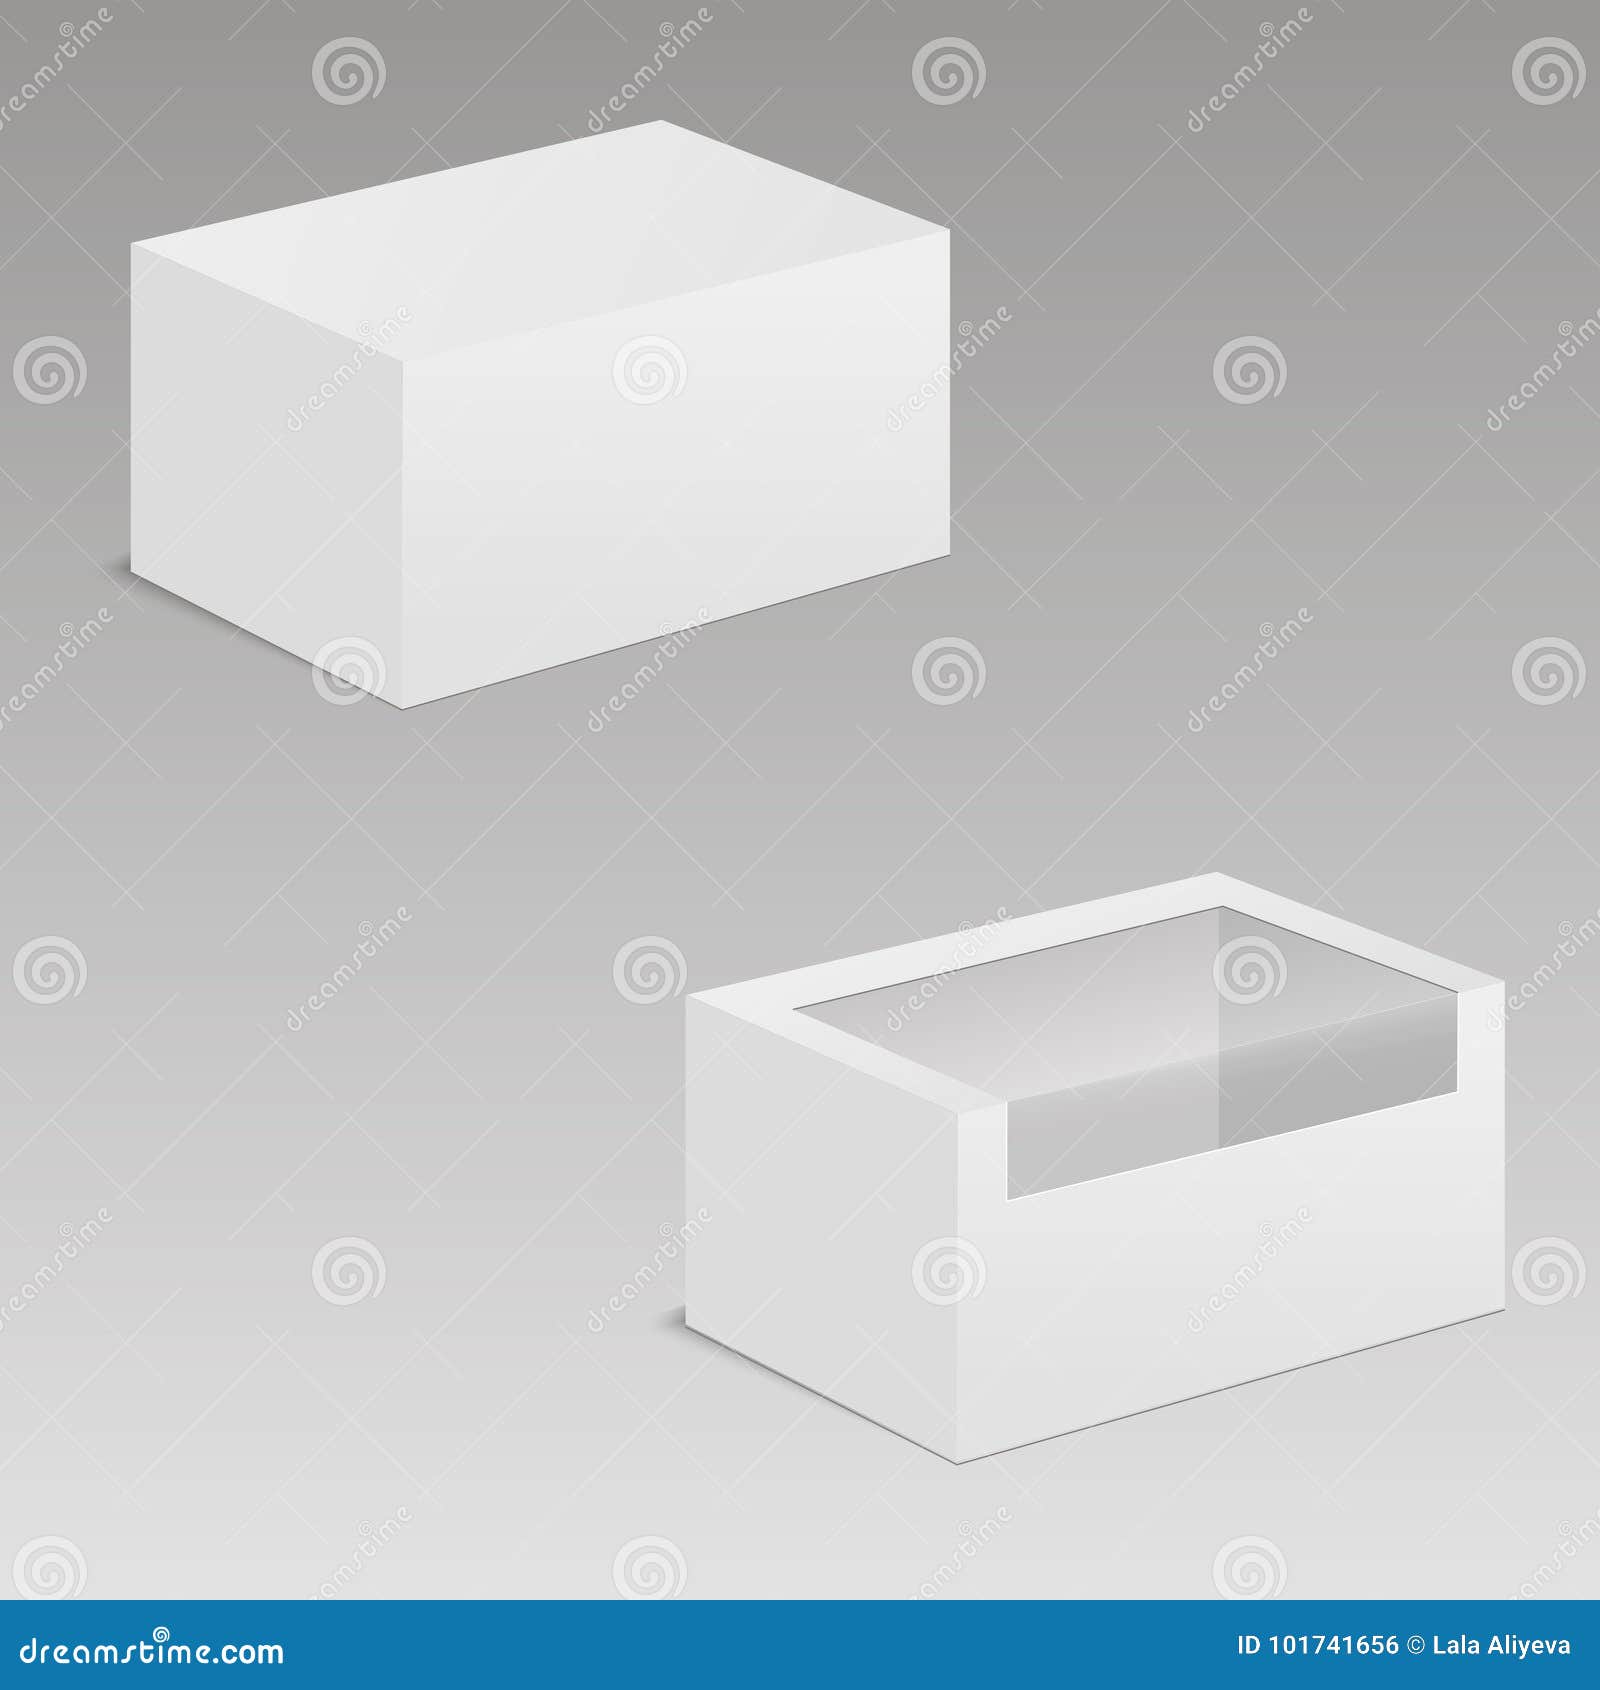 Download White Mock Up Blank Cardboard Box With Window For Sandwich ...